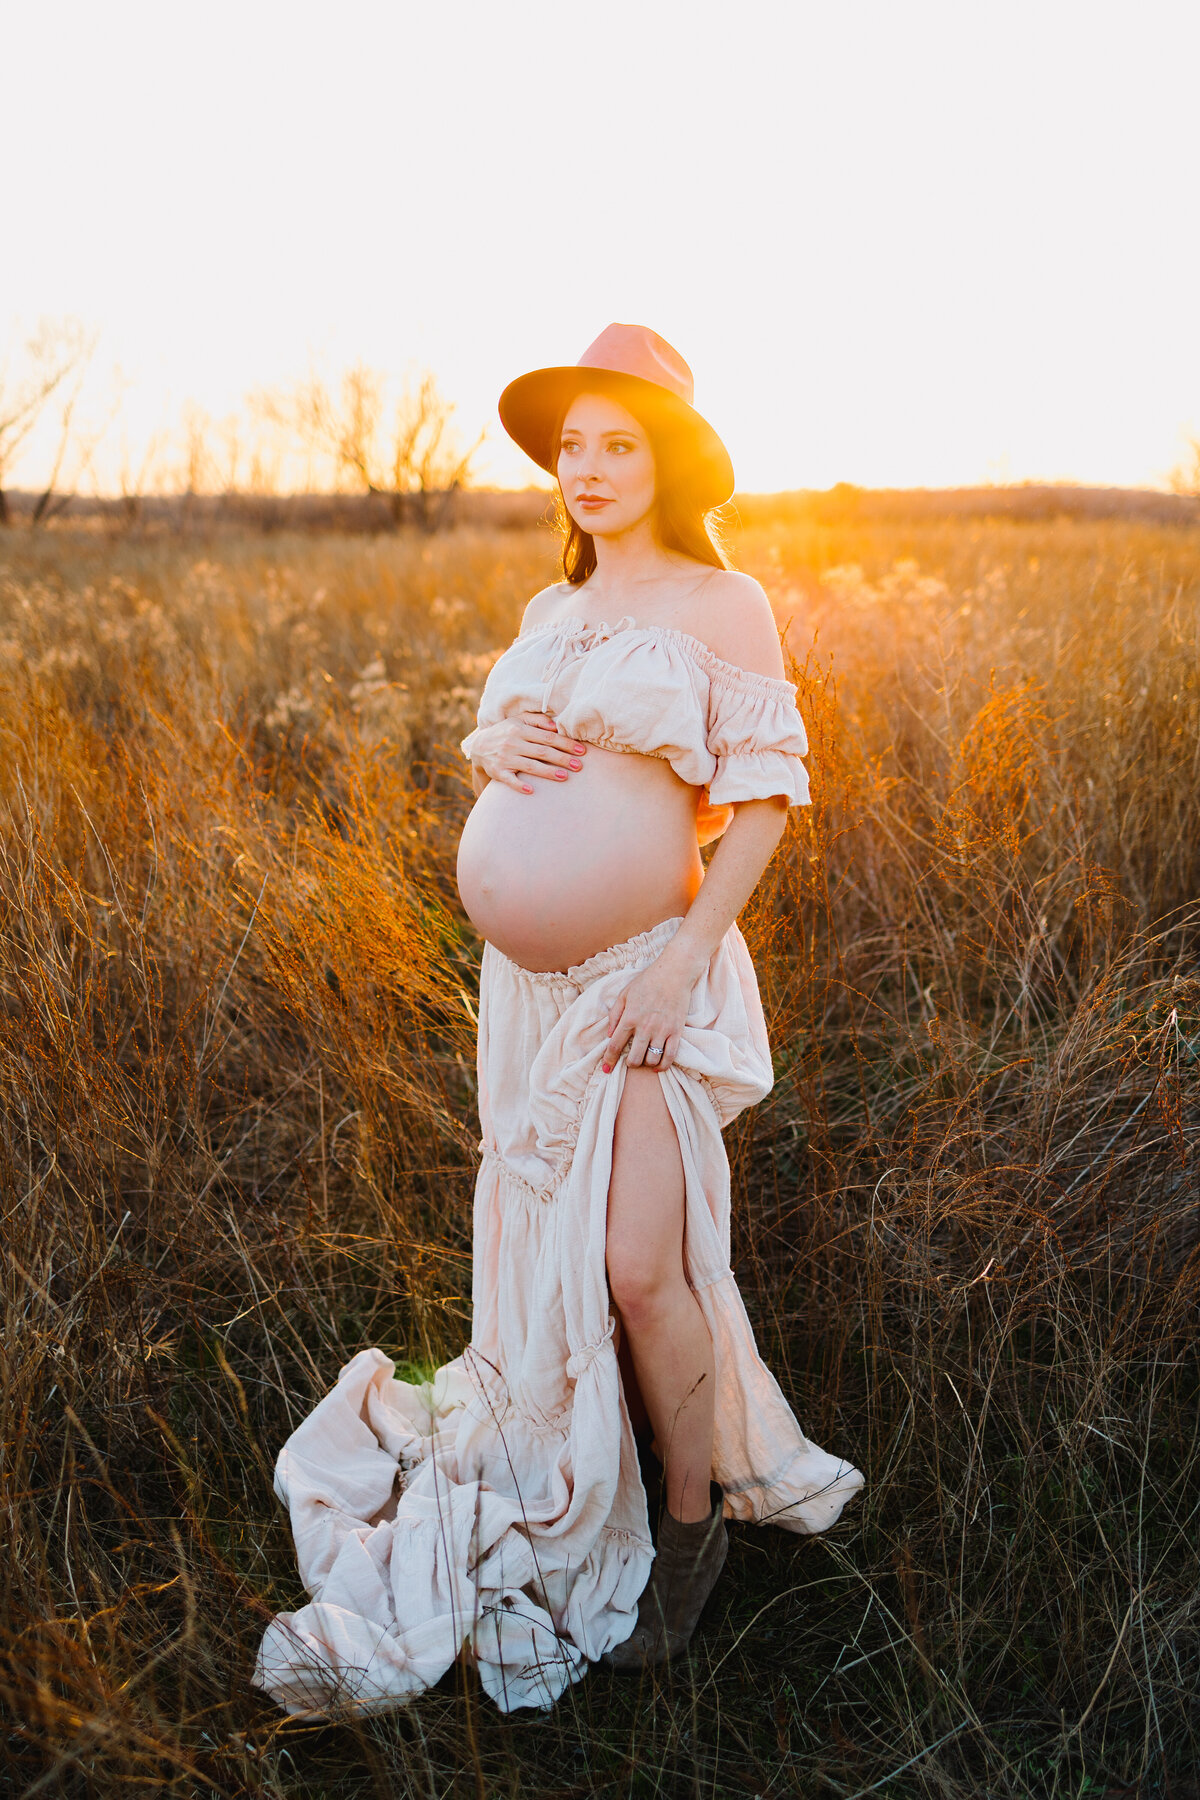 Photograph of pregnant woman in a garden with tall grass, she is showing her belly dressed in a skirt and a short white t-shirt. On her head is a brown hat and she is looking to the left side.